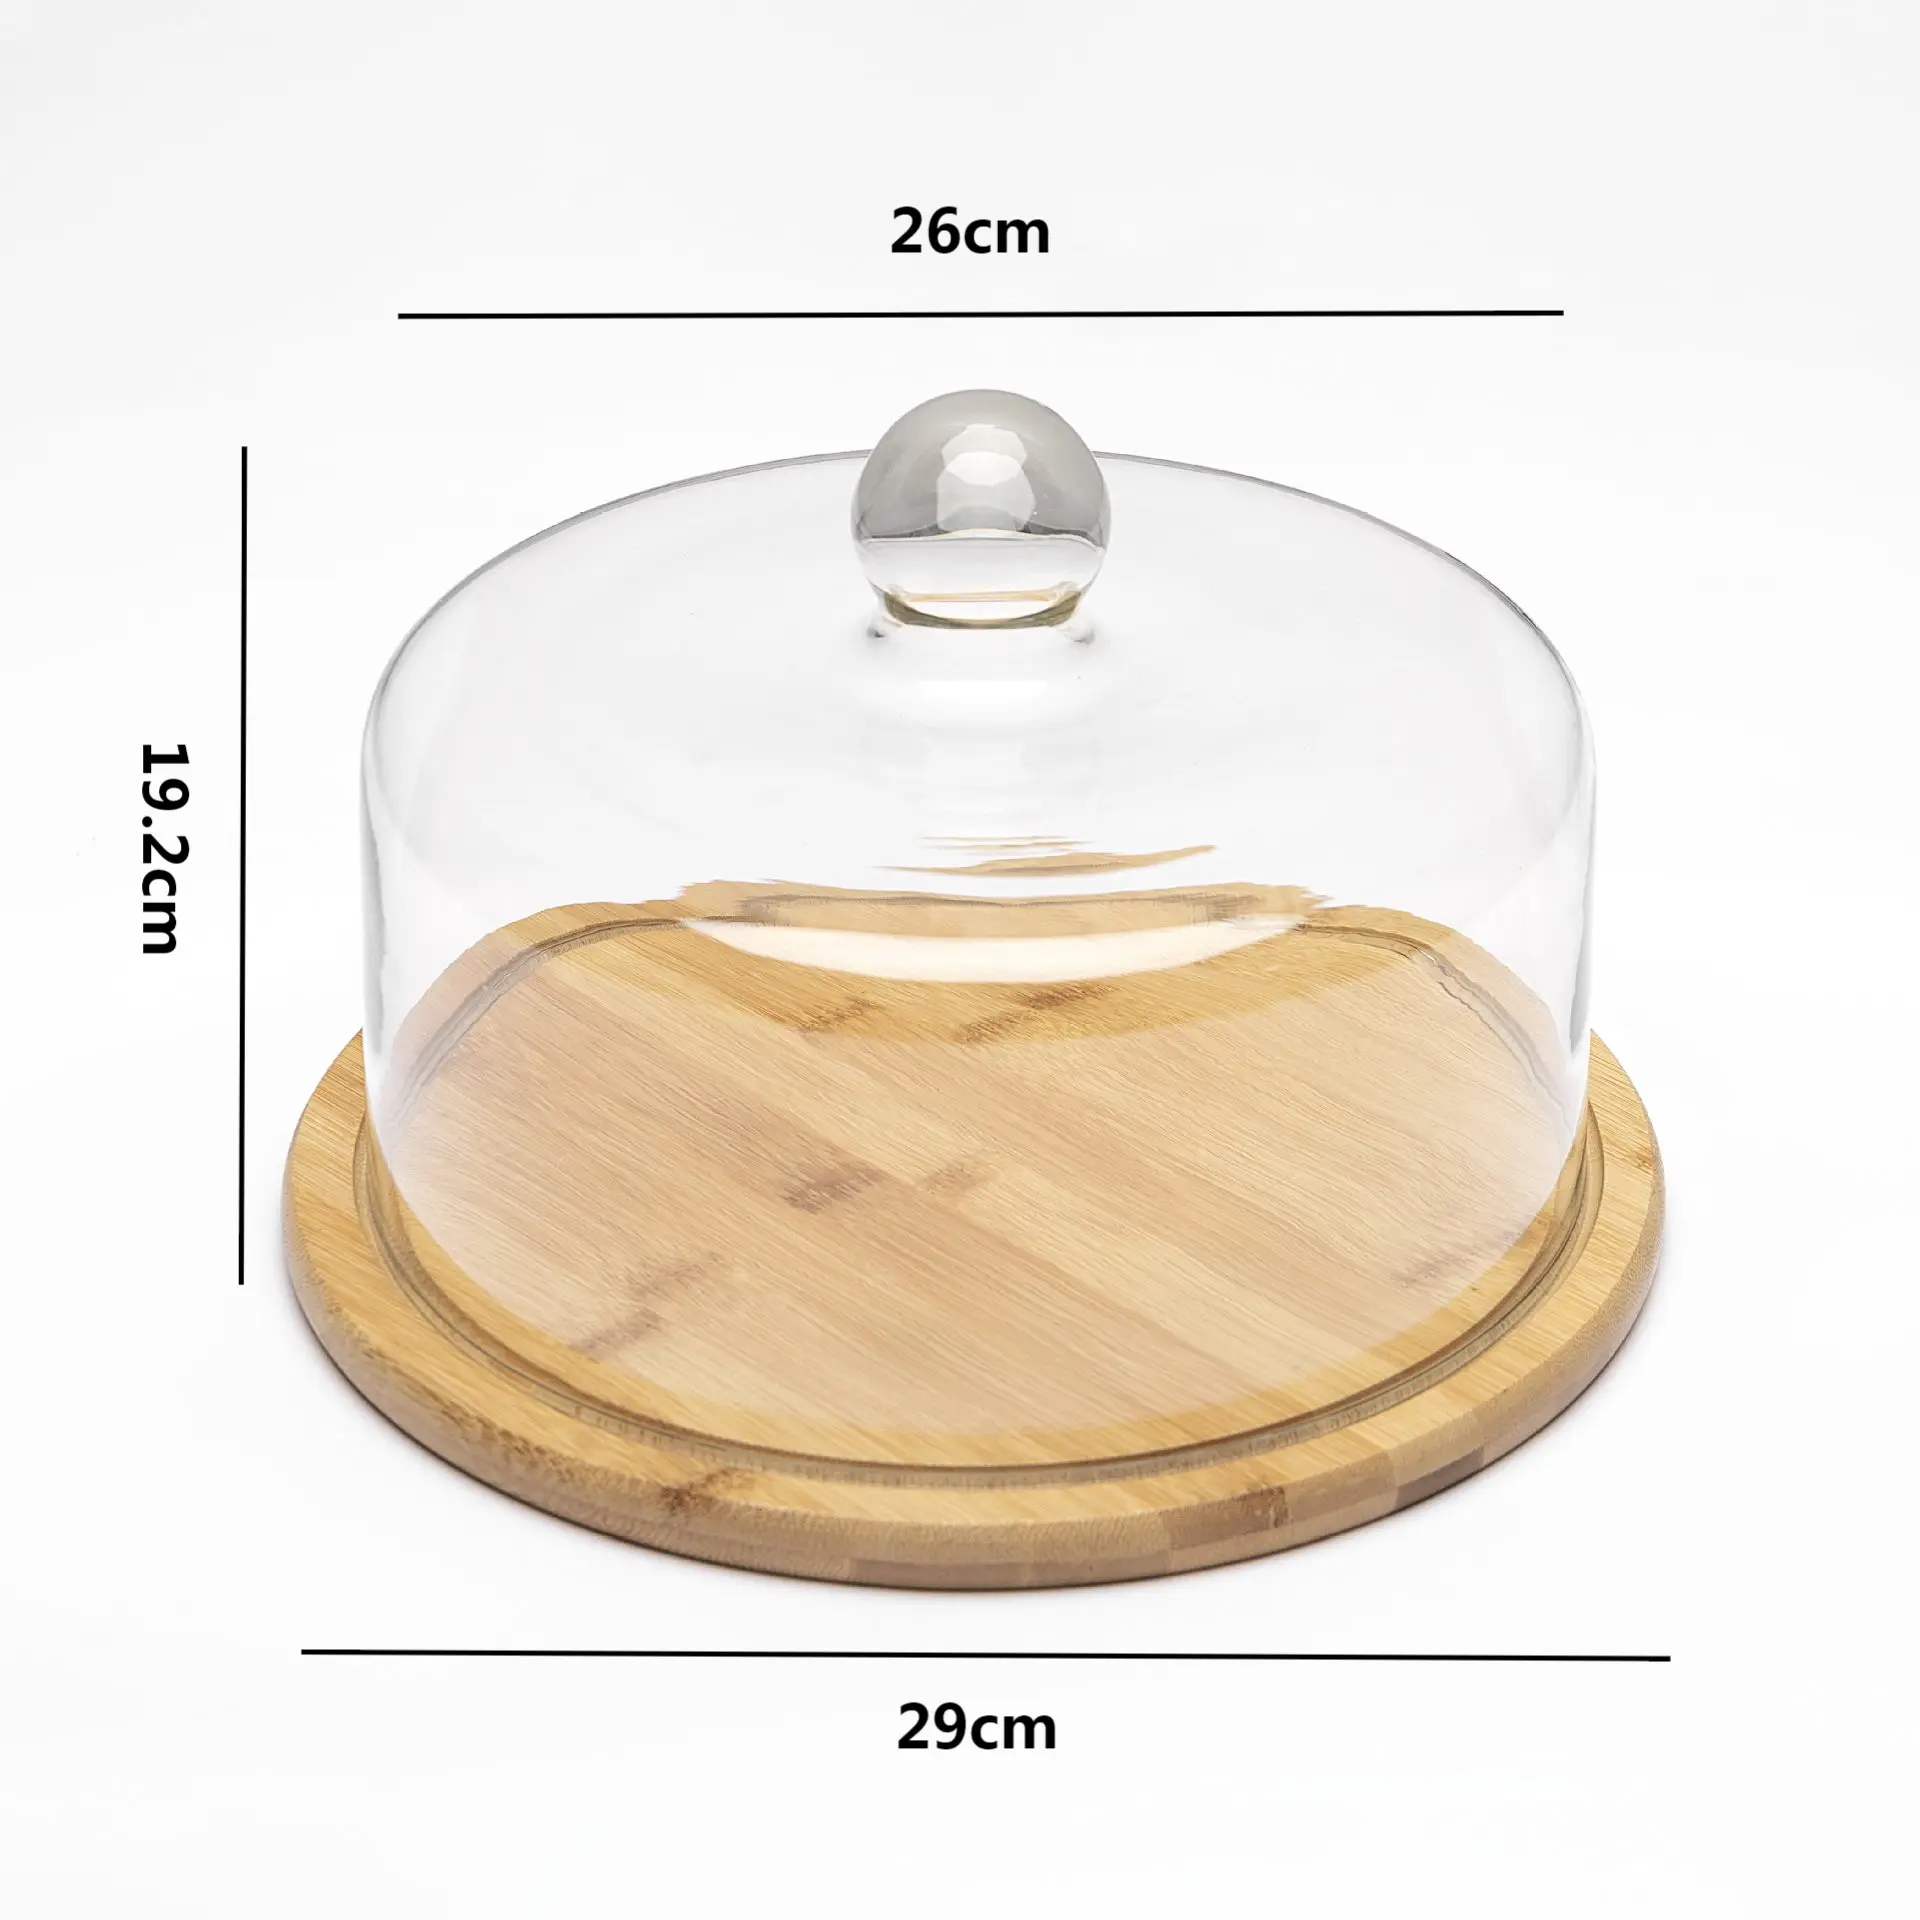 100% Natural Eco Friendly Decorating Serving Platter Cheese Board Bamboo Cake Stand with Glass Dome